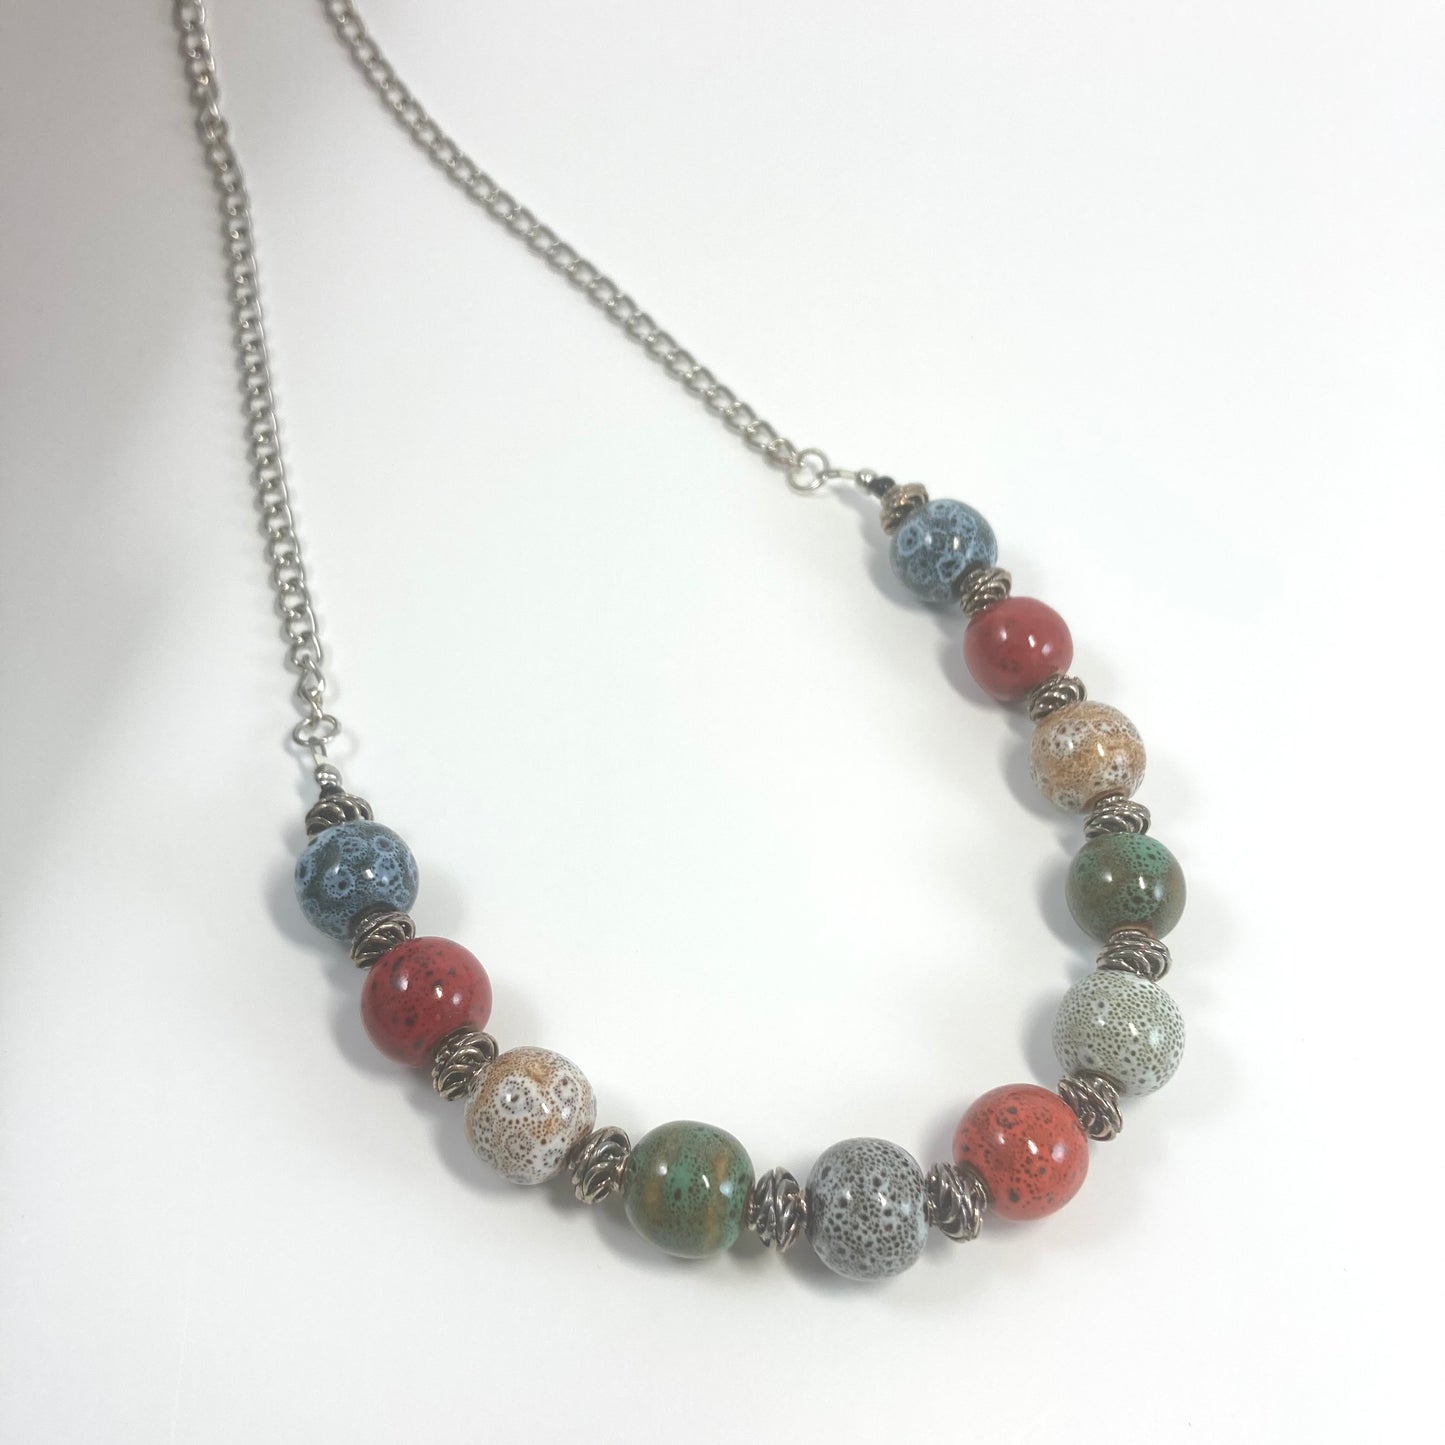 44N - Multi-Colored Bead Necklace